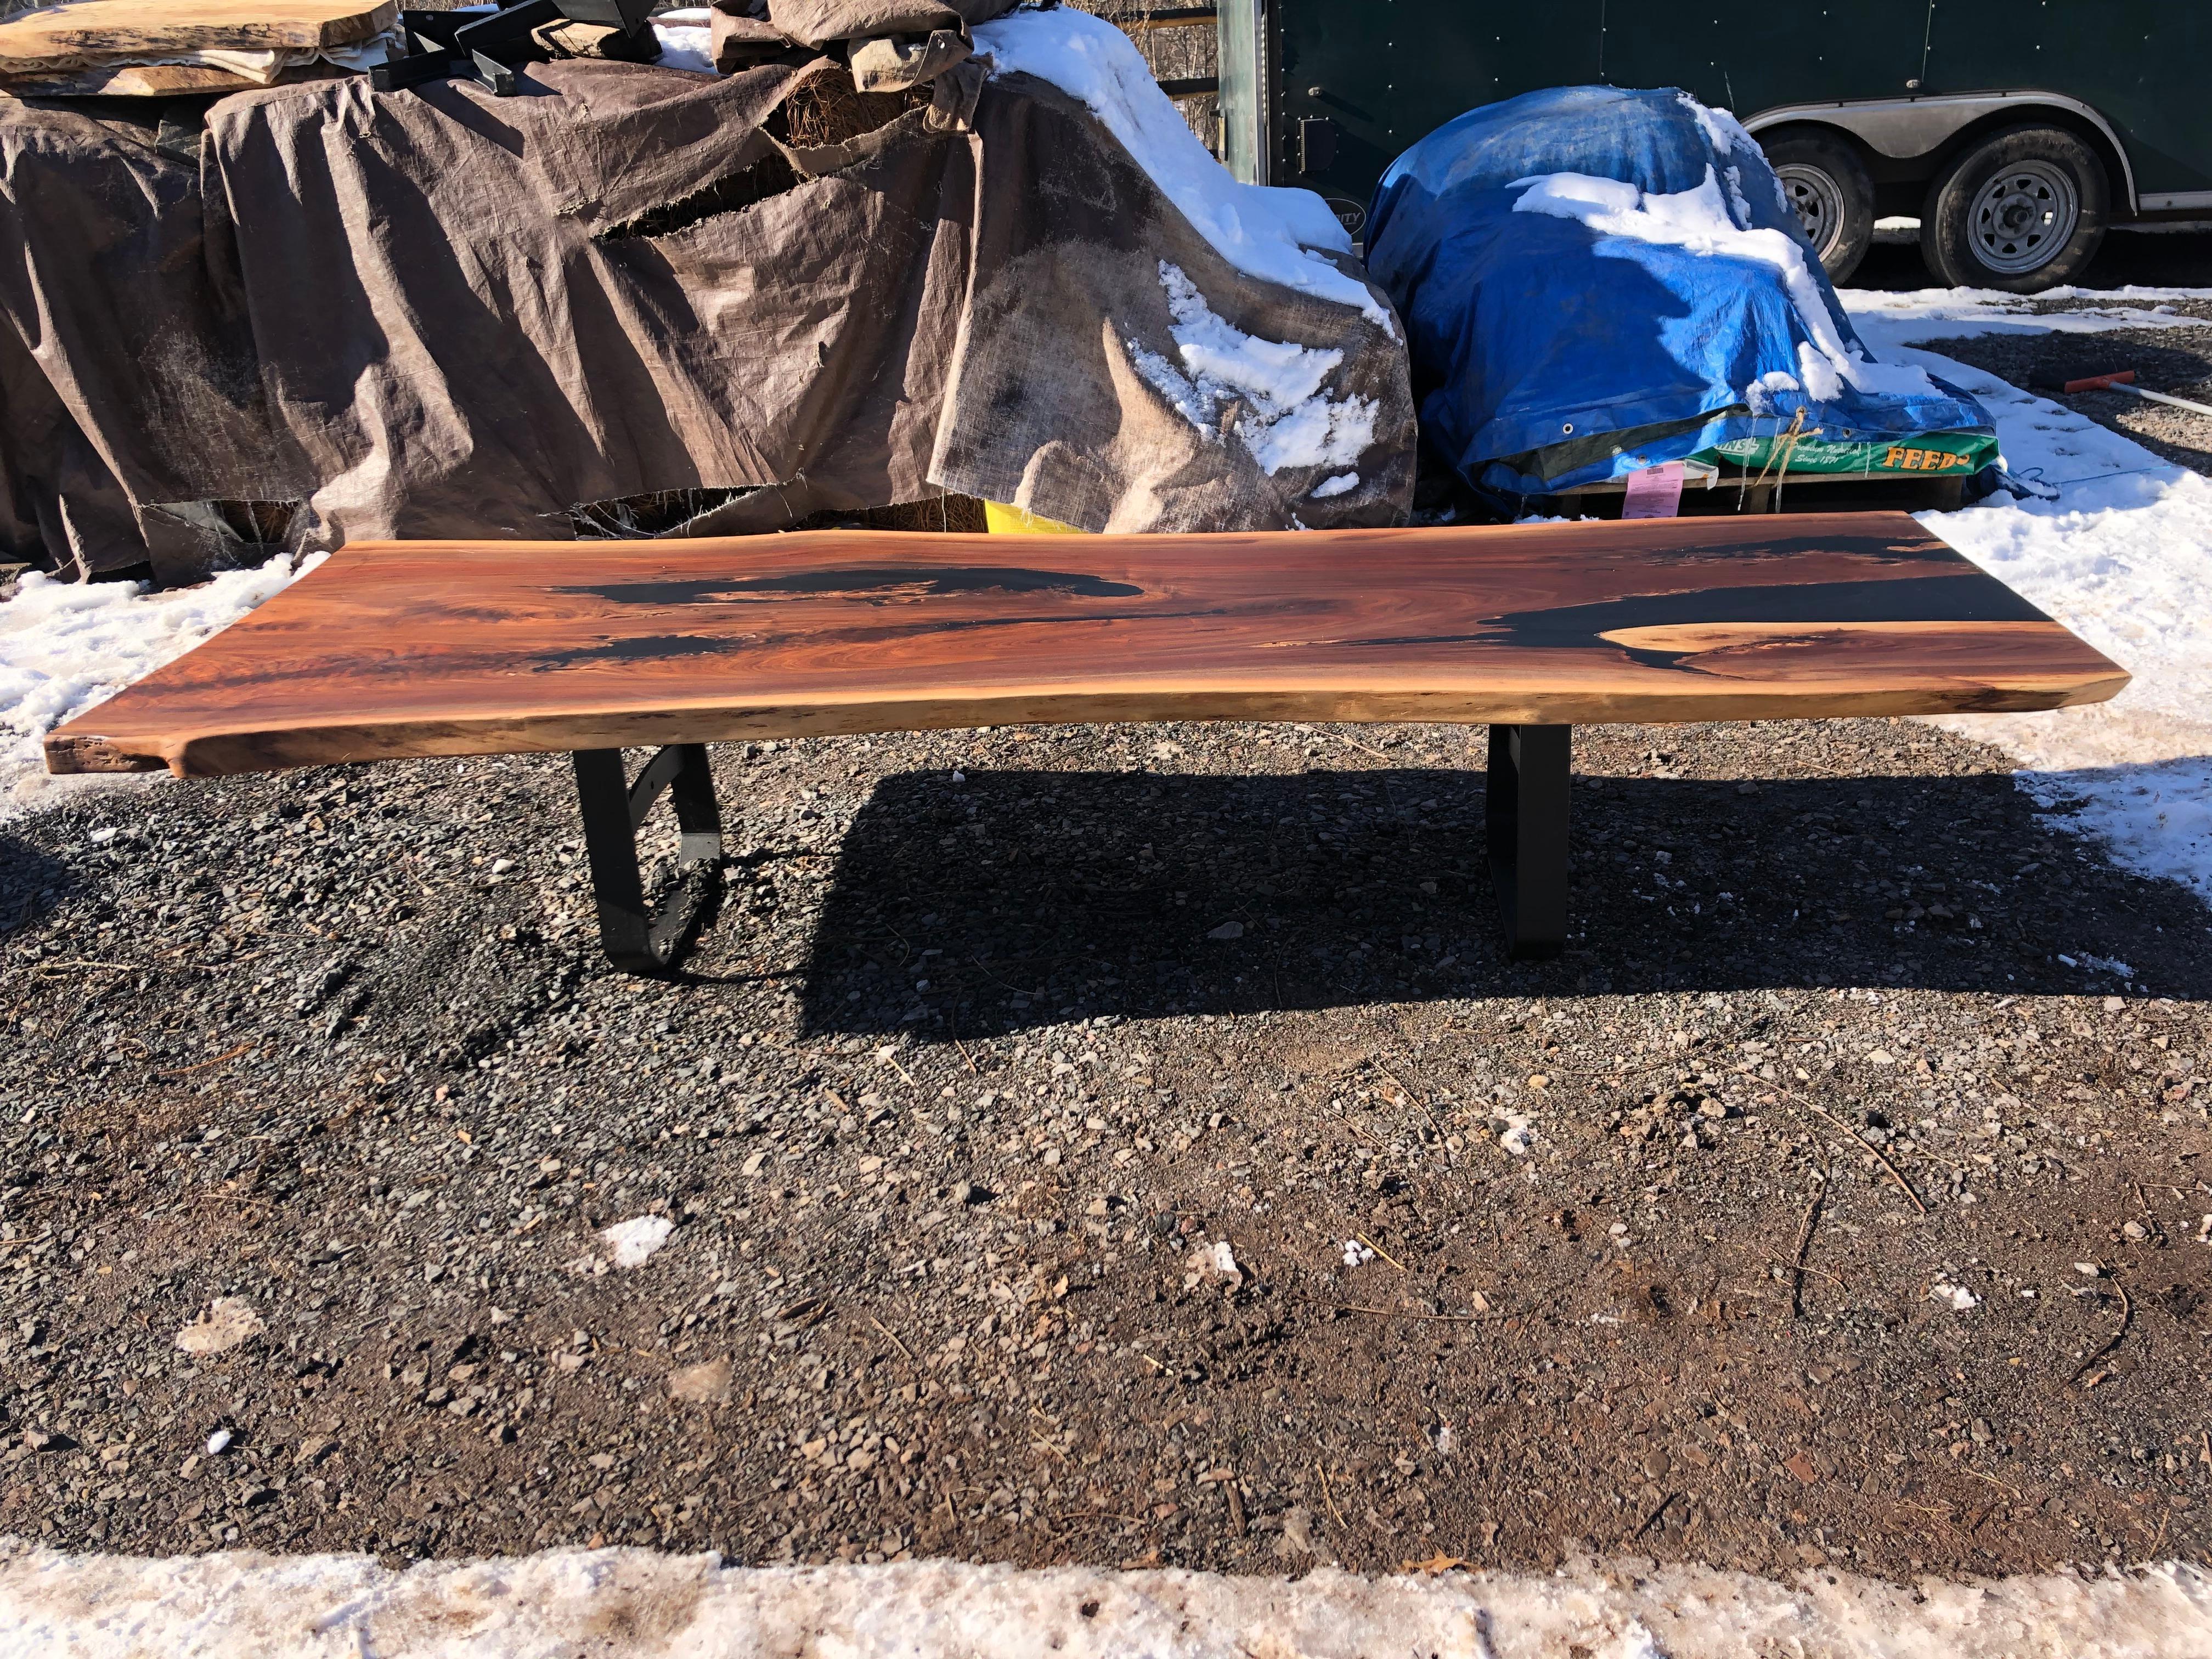 Very long live edge walnut slab coffee table having gorgeous rectangular irregular shape, lively grain with amazing coloration, and some black resin filled crevices. Legs are black iron in a contemporary industrial design. Because the slab is